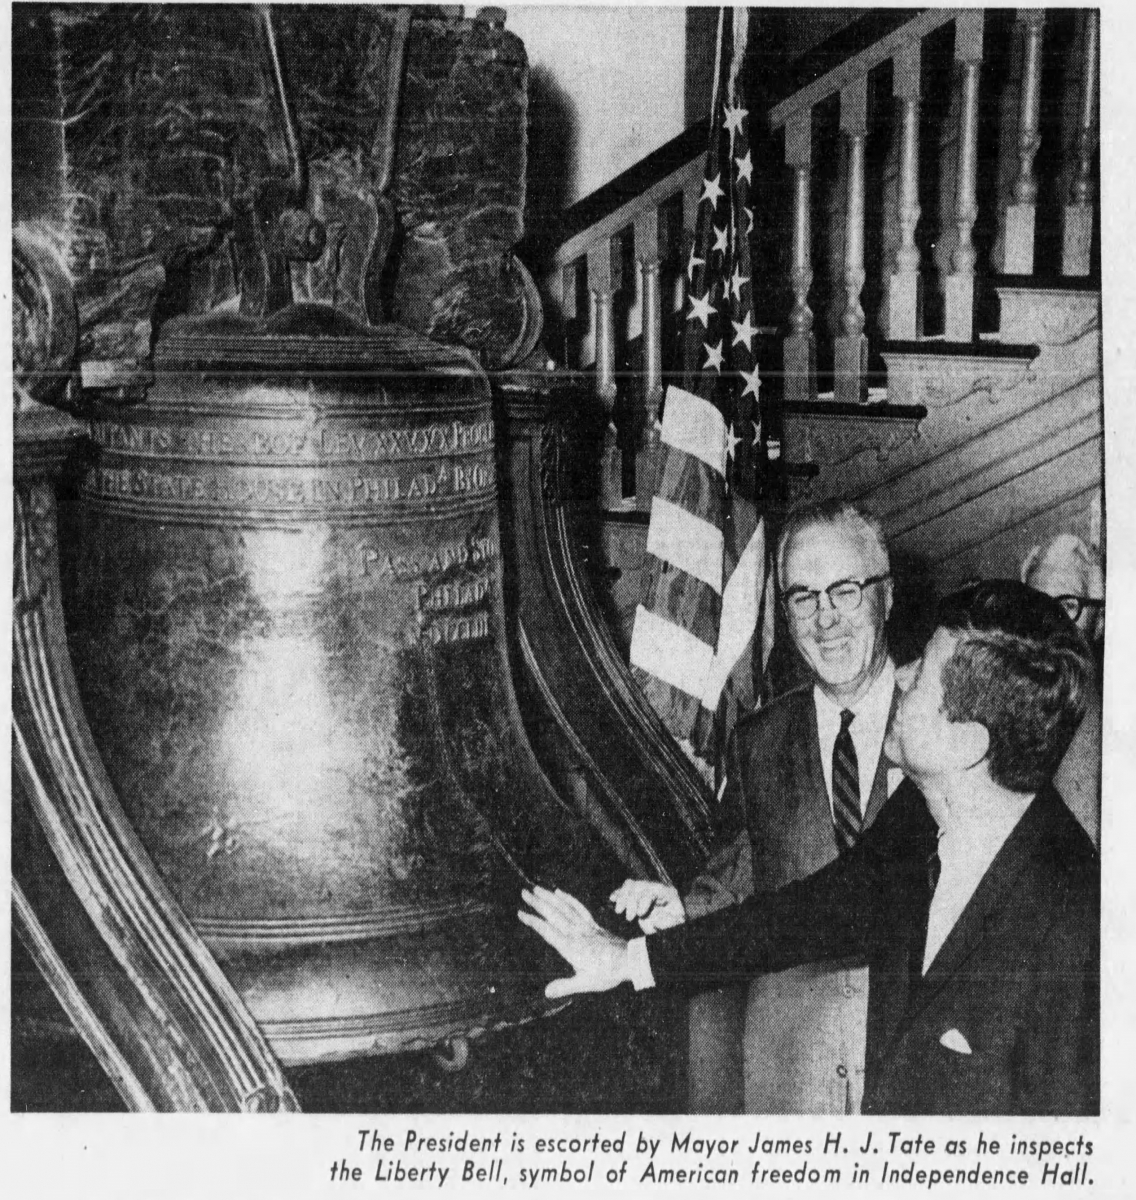 Kennedy touches the Liberty Bell - July 4, 1962 - The Philadelphia Inquirer